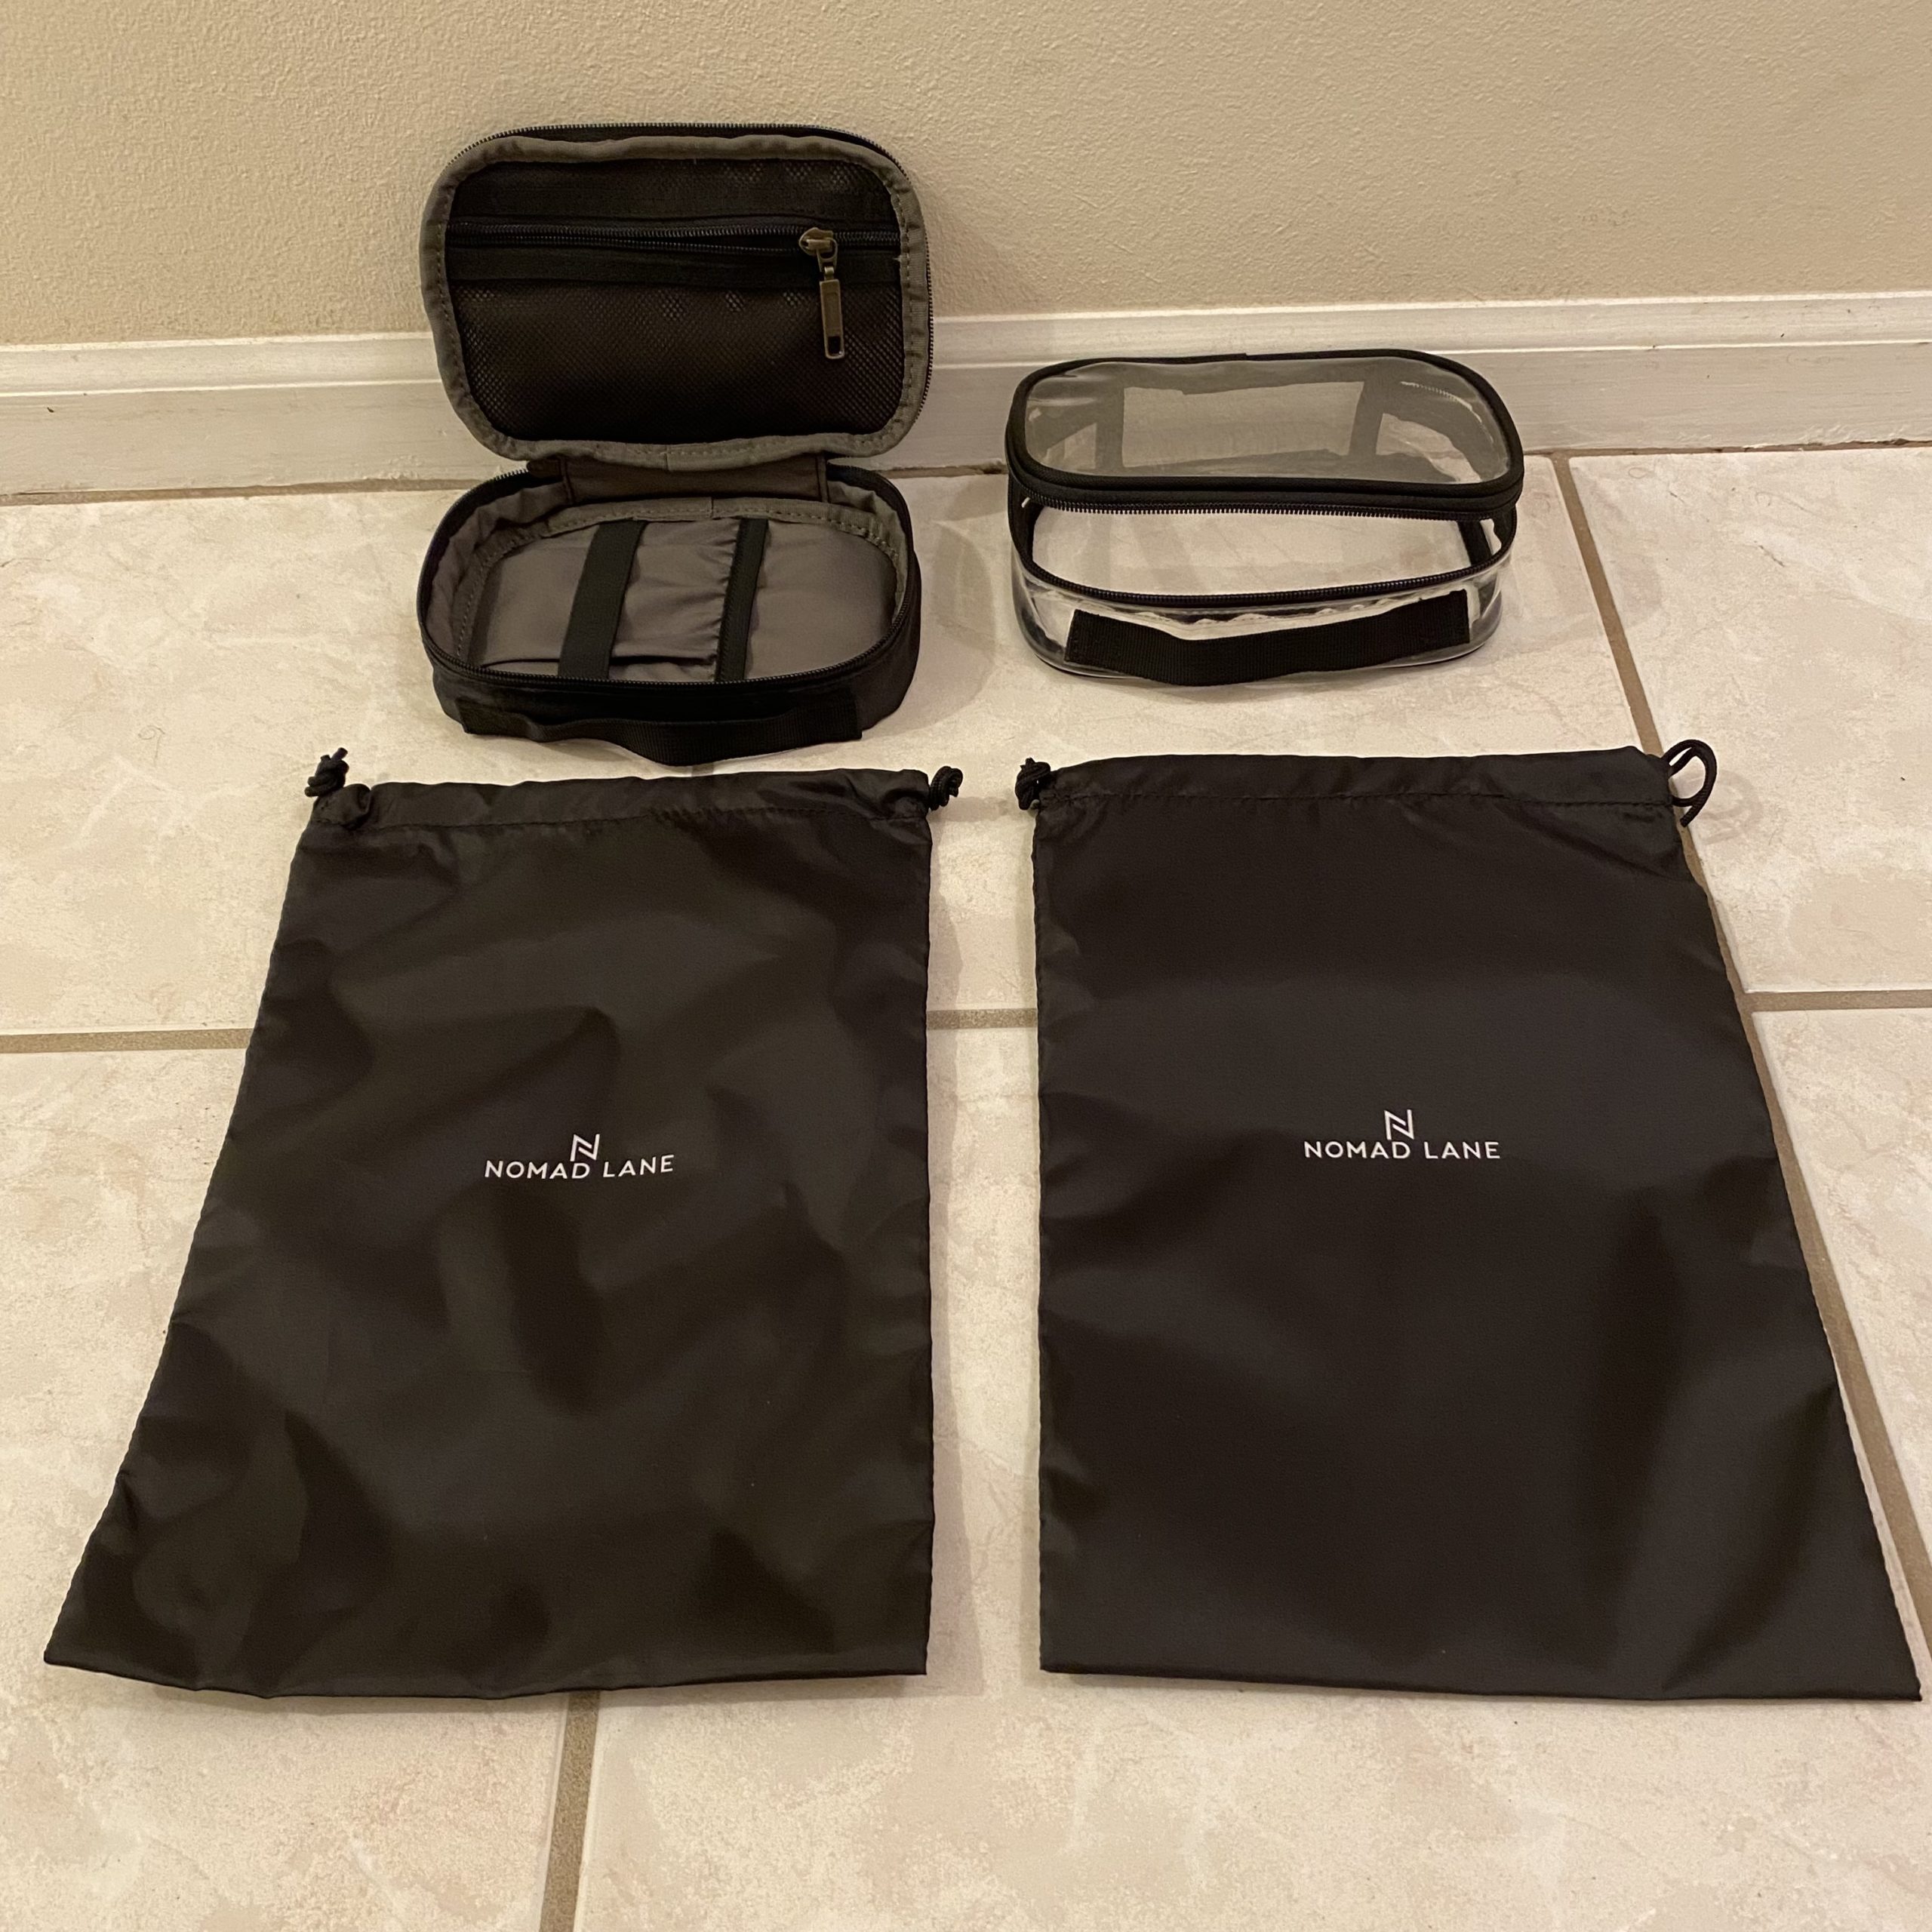 Review & Giveaway: Nomad Lane Bento Bag - One Mile at a Time